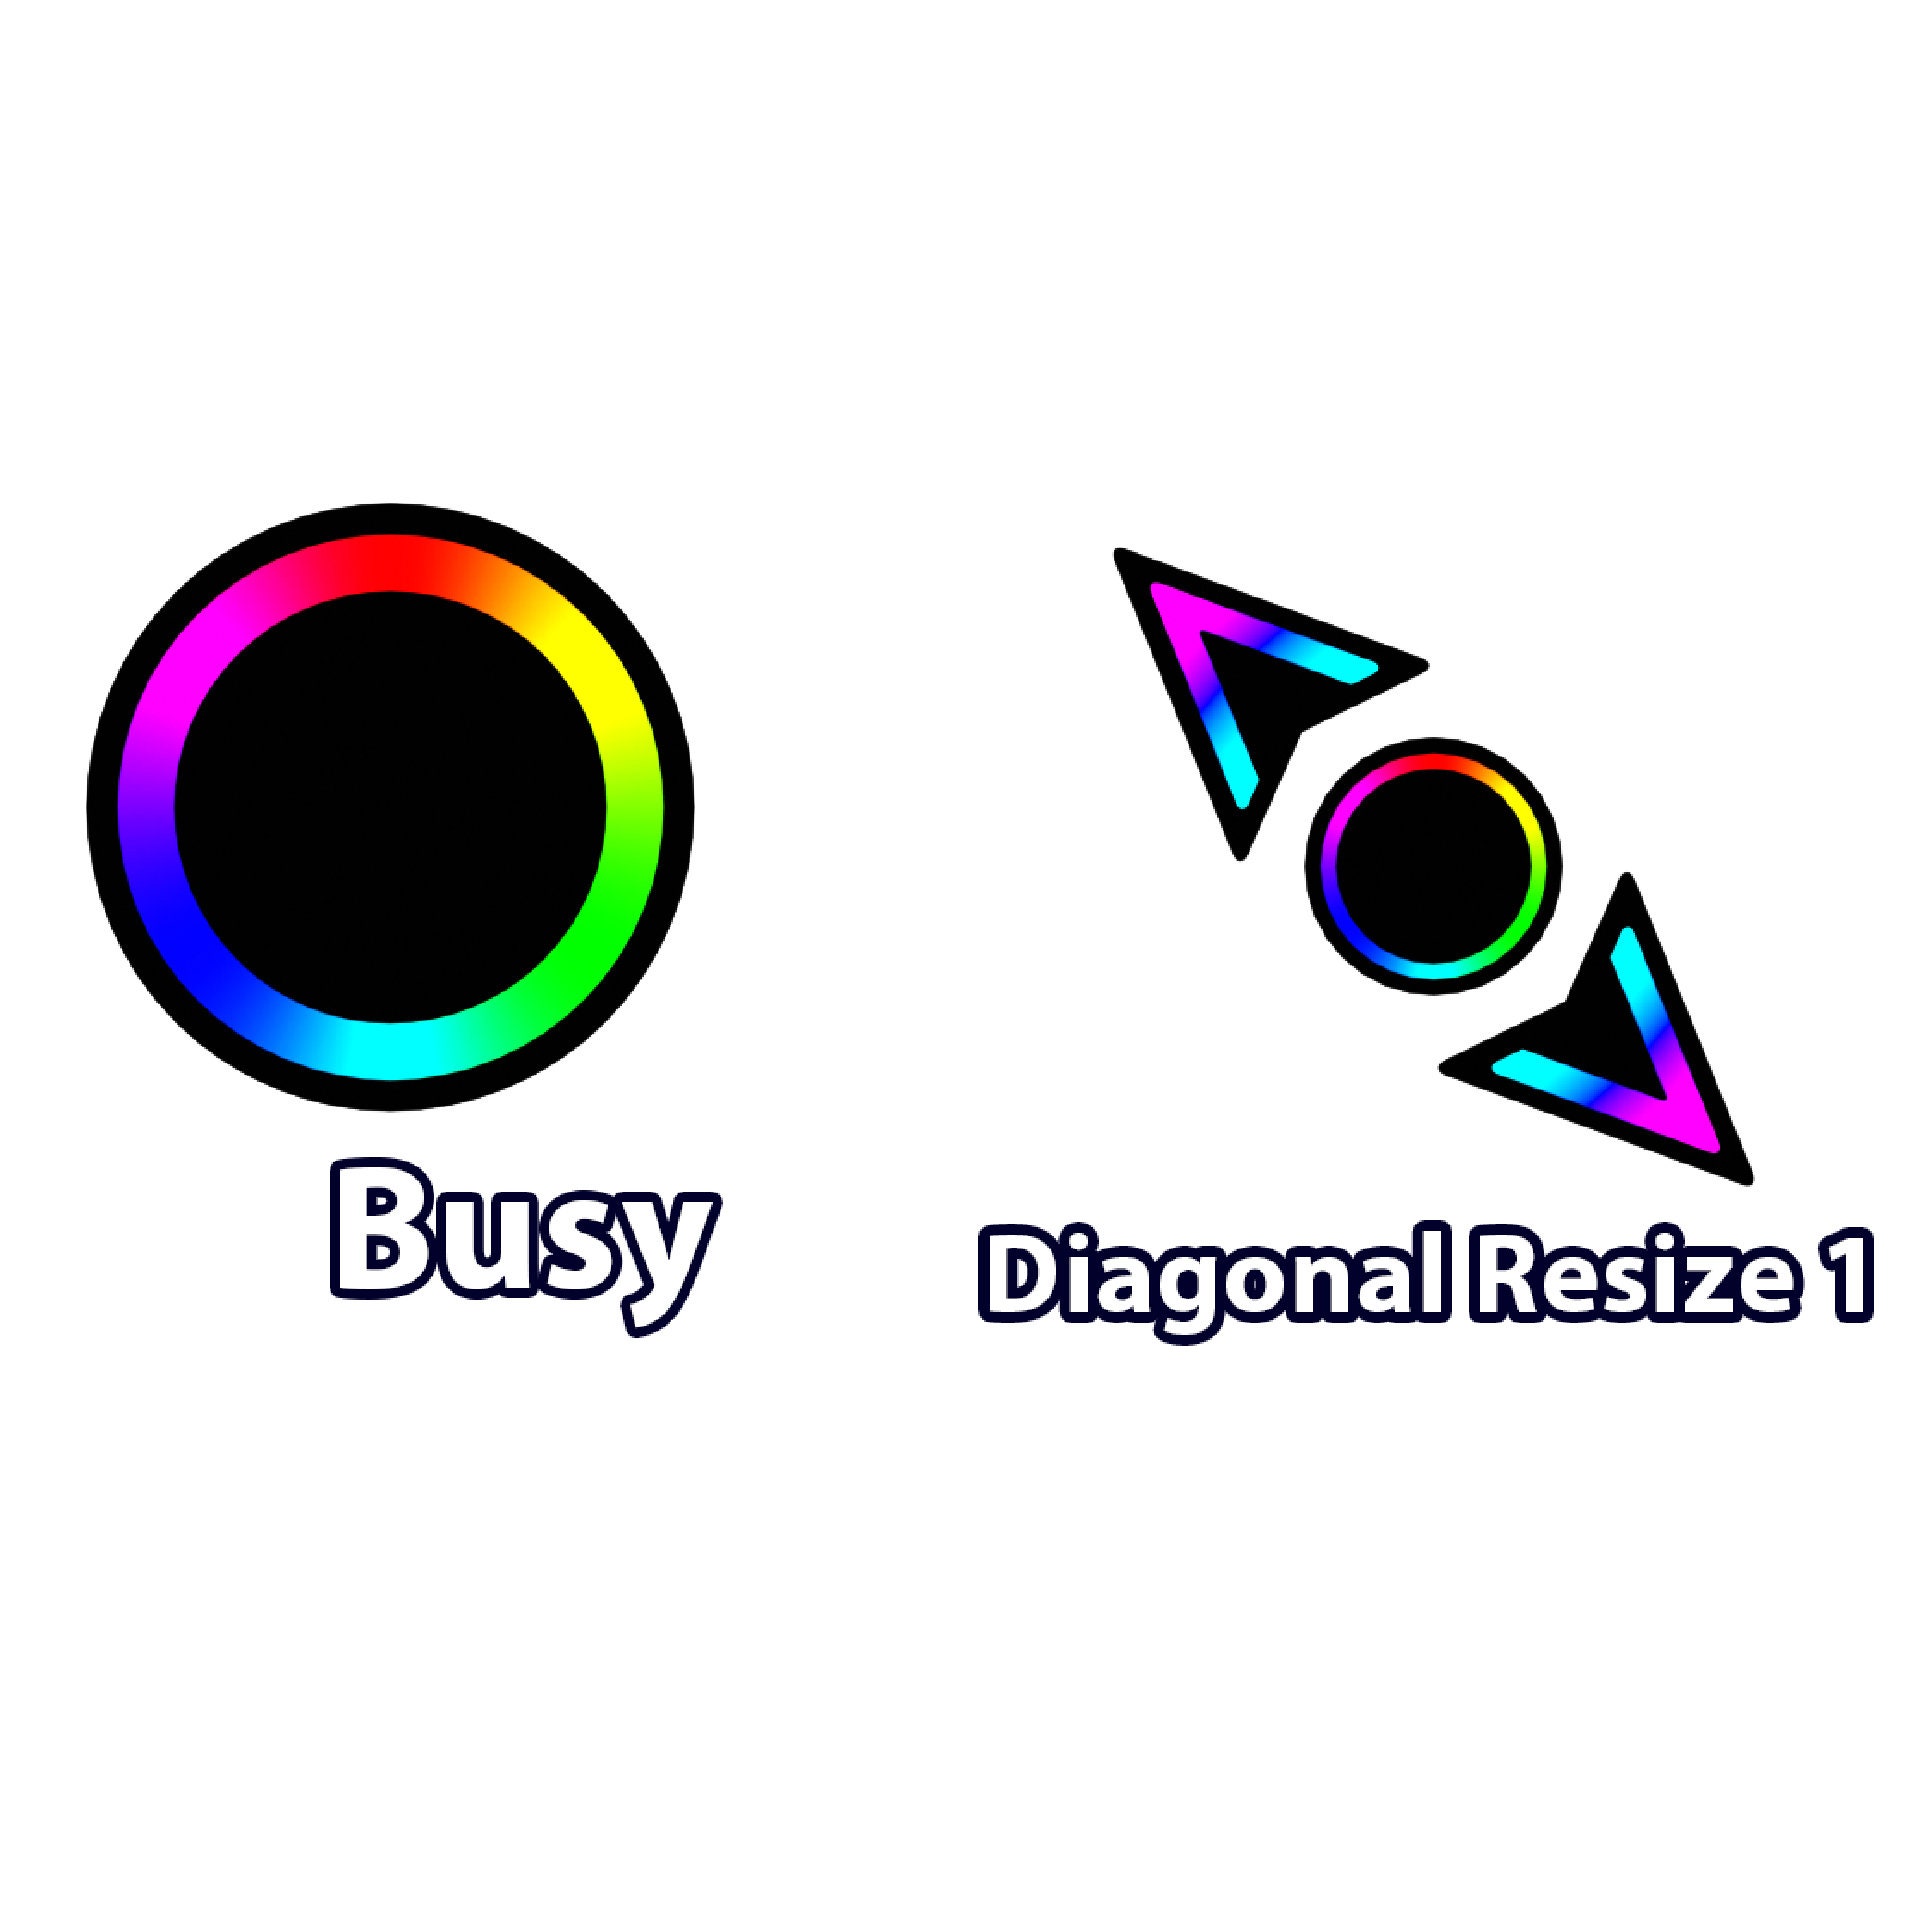 Neon RGB Animated Computer Cursor Pack, Perfect for Gamers